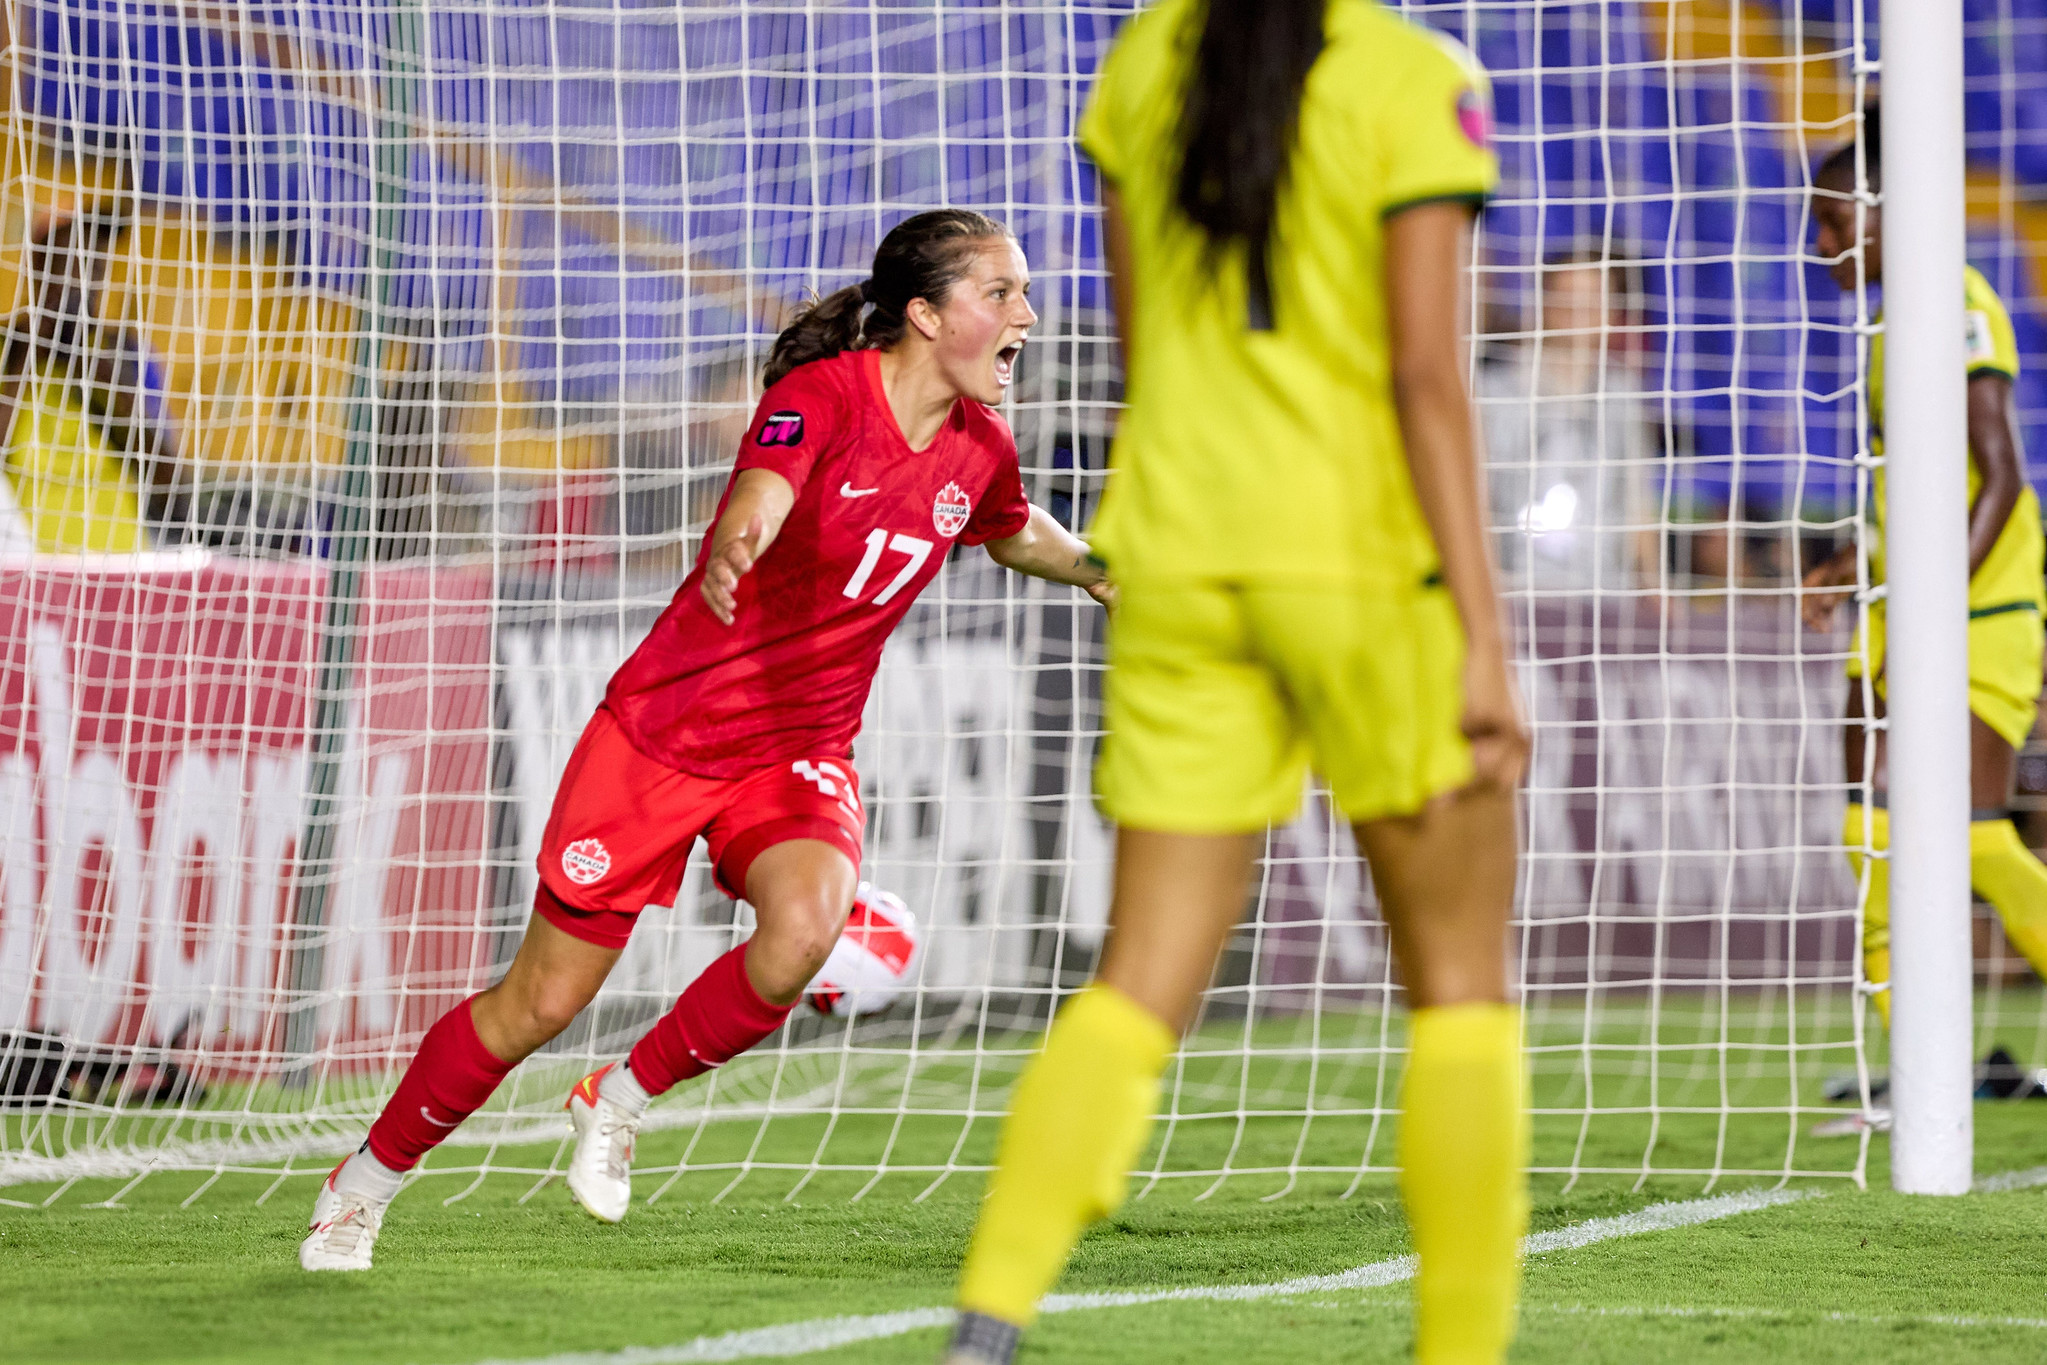 CanWNT Midfielder, Jessie Fleming, Will Play in the Jamaica vs CanWNT Game on September 22